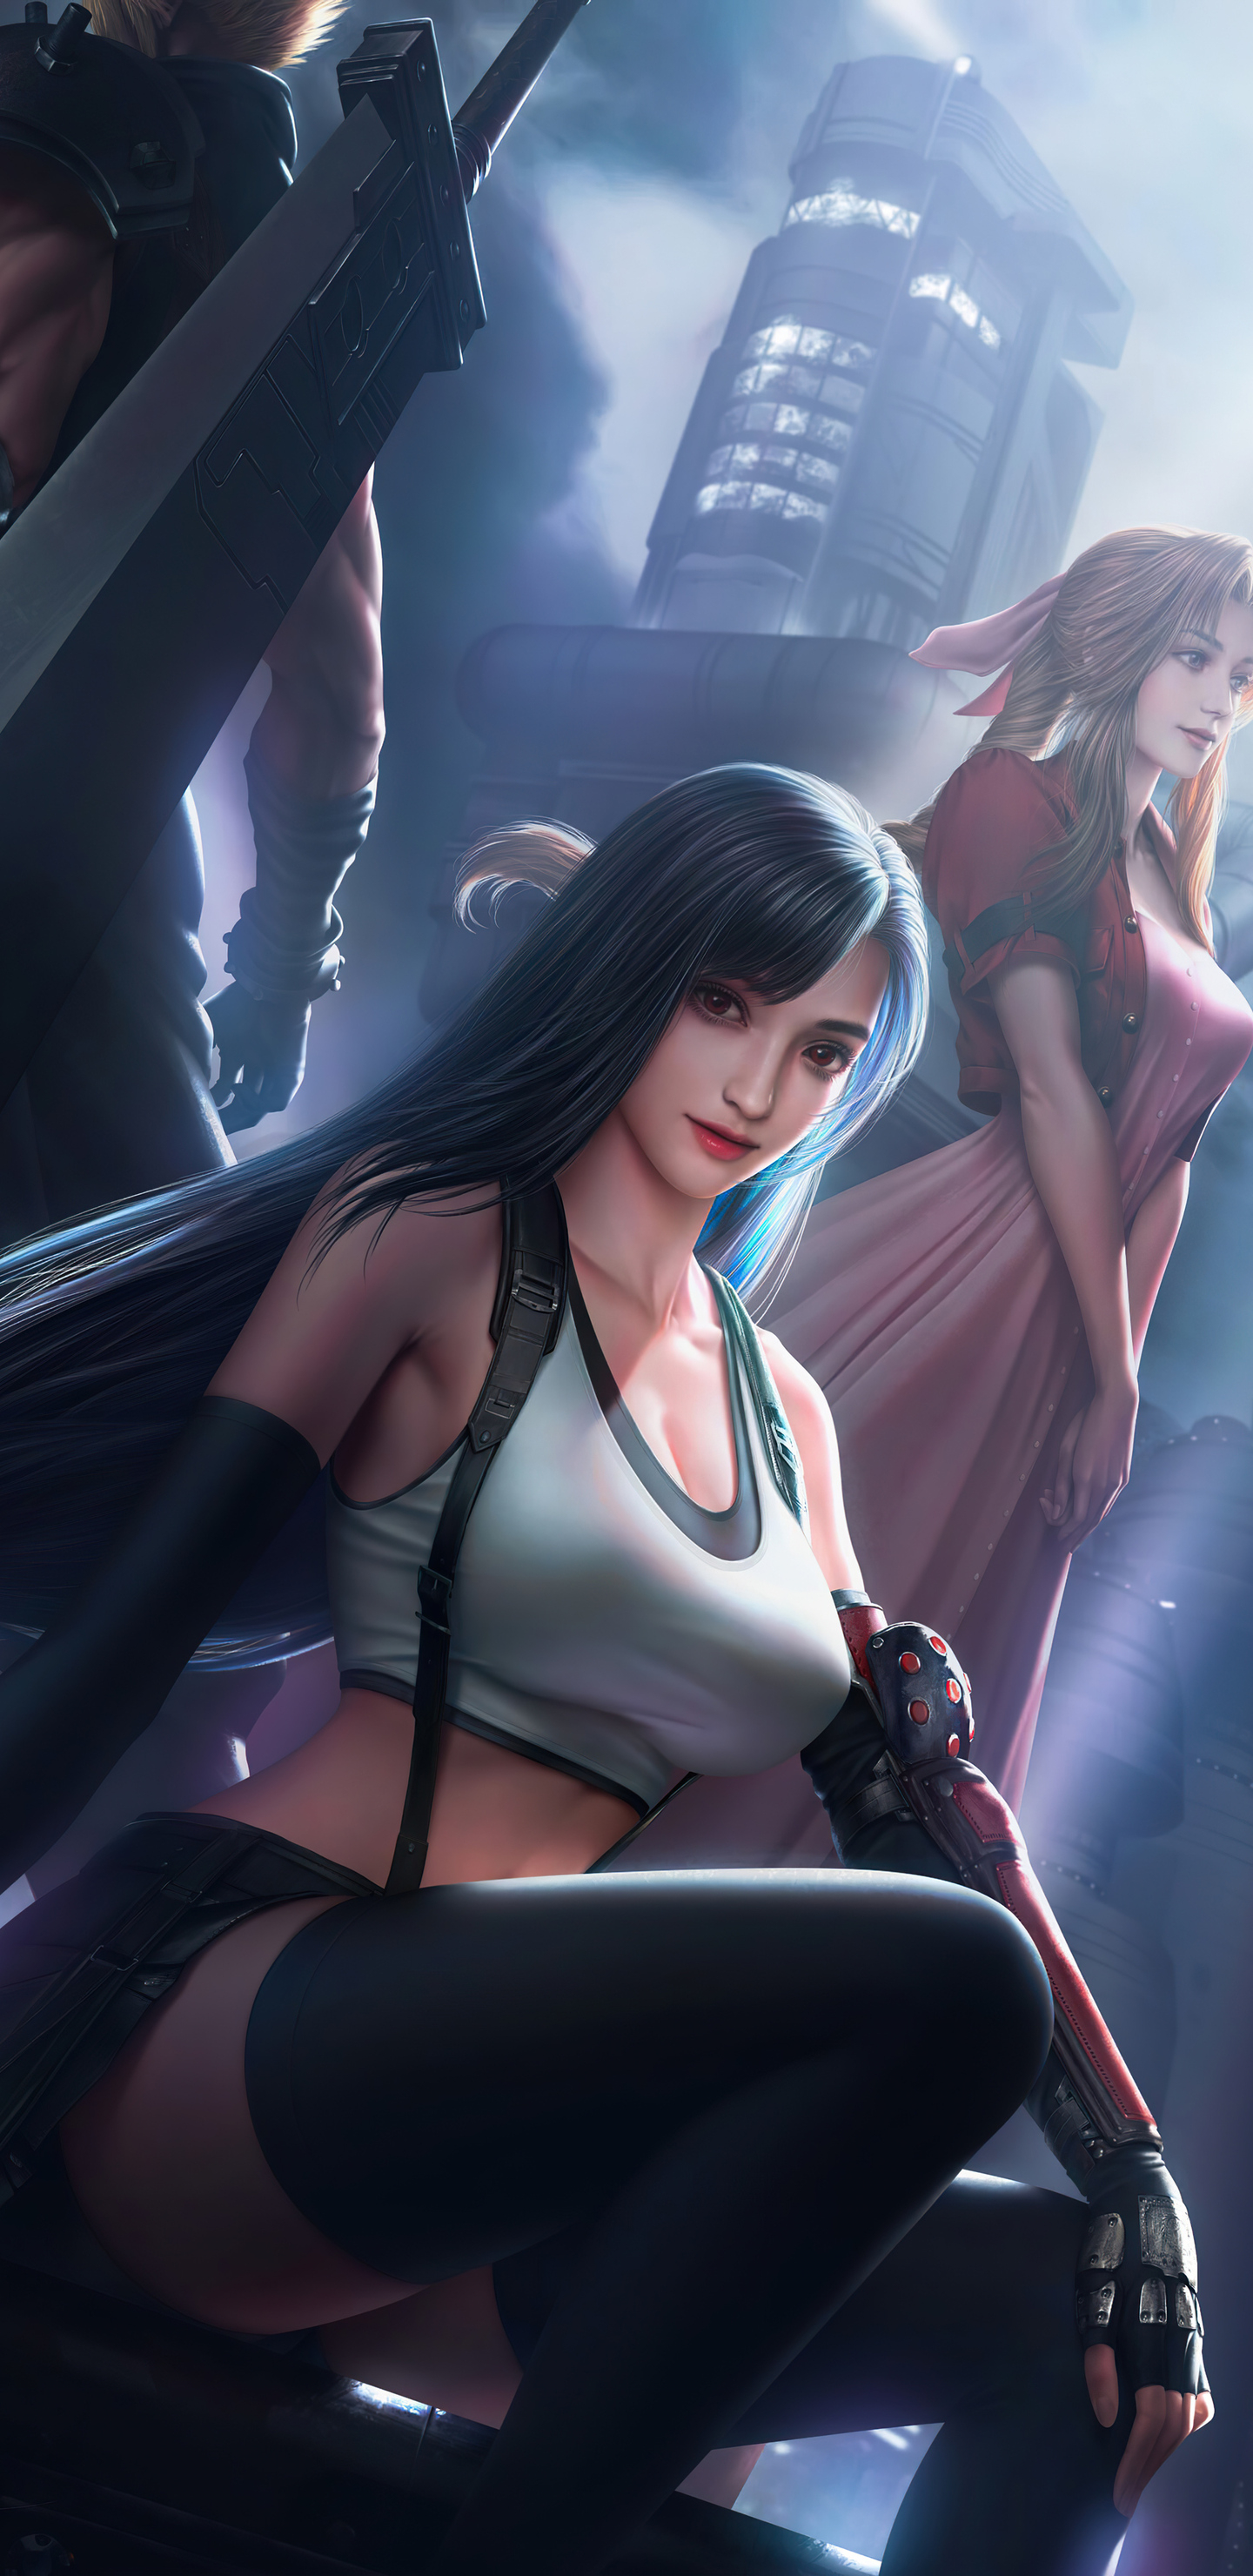 1440x2960 Tifa Lockhart In Final Fantasy VII 4k Samsung Galaxy Note 9,8, S9,S8,S8+ QHD HD 4k Wallpapers, Images, Backgrounds, Photos and Pictures